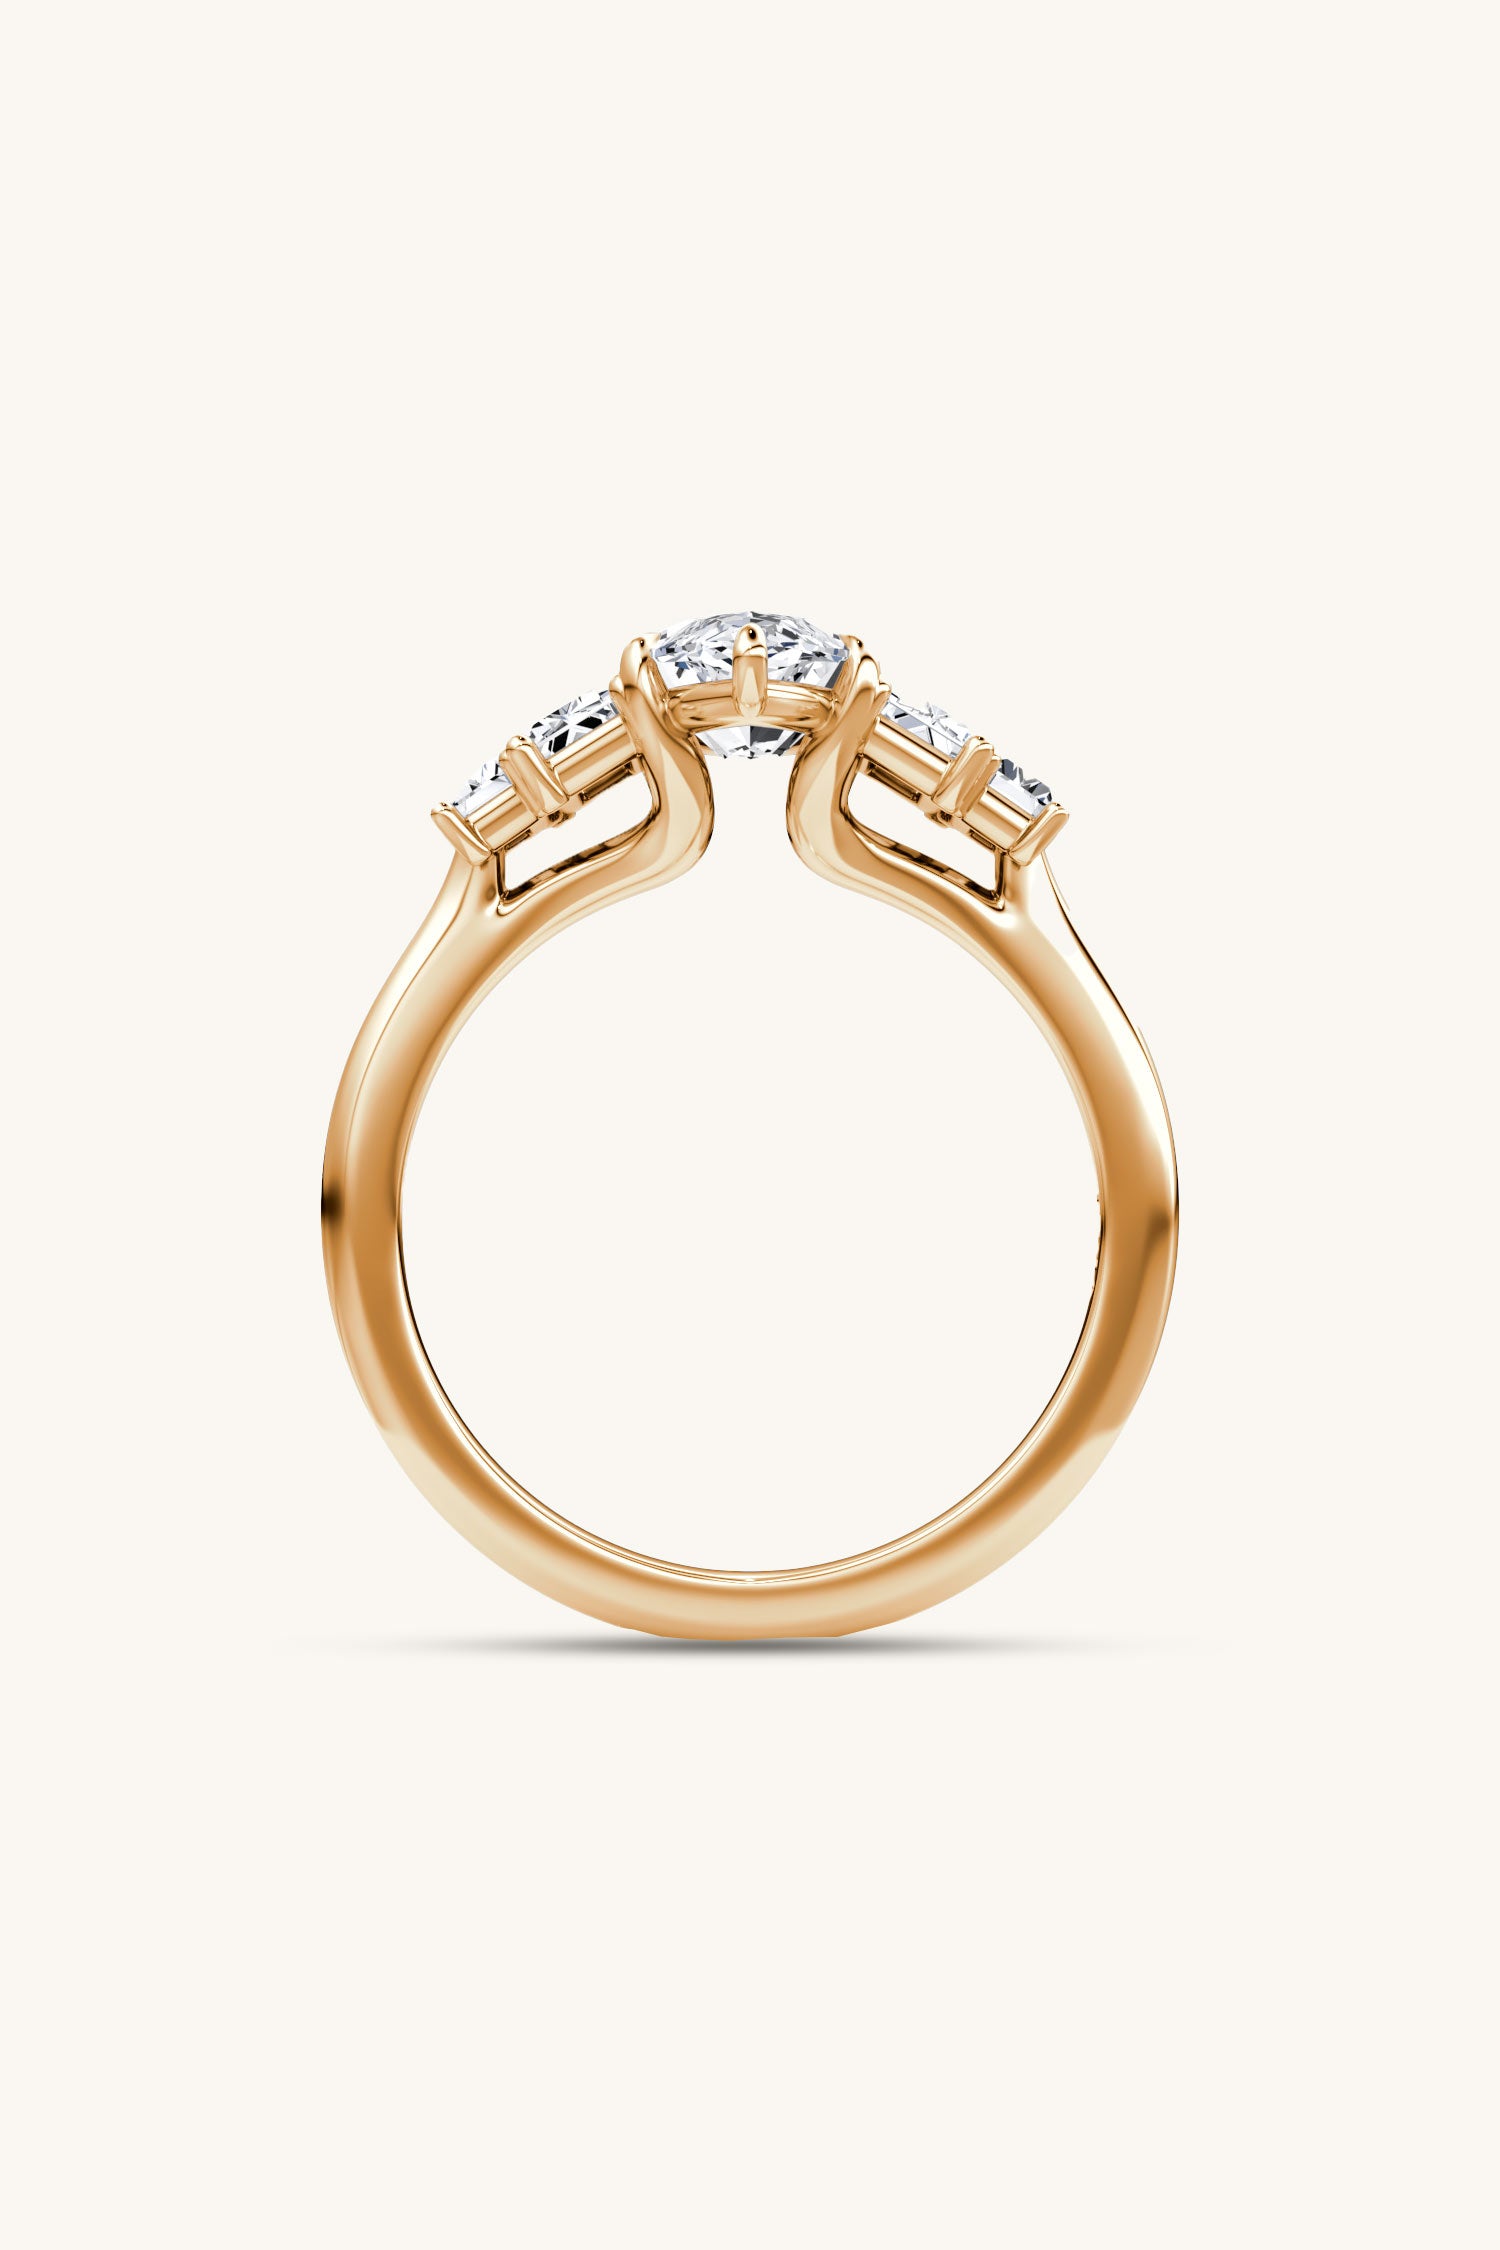 Panchsheel Marquise Solitaire Ring